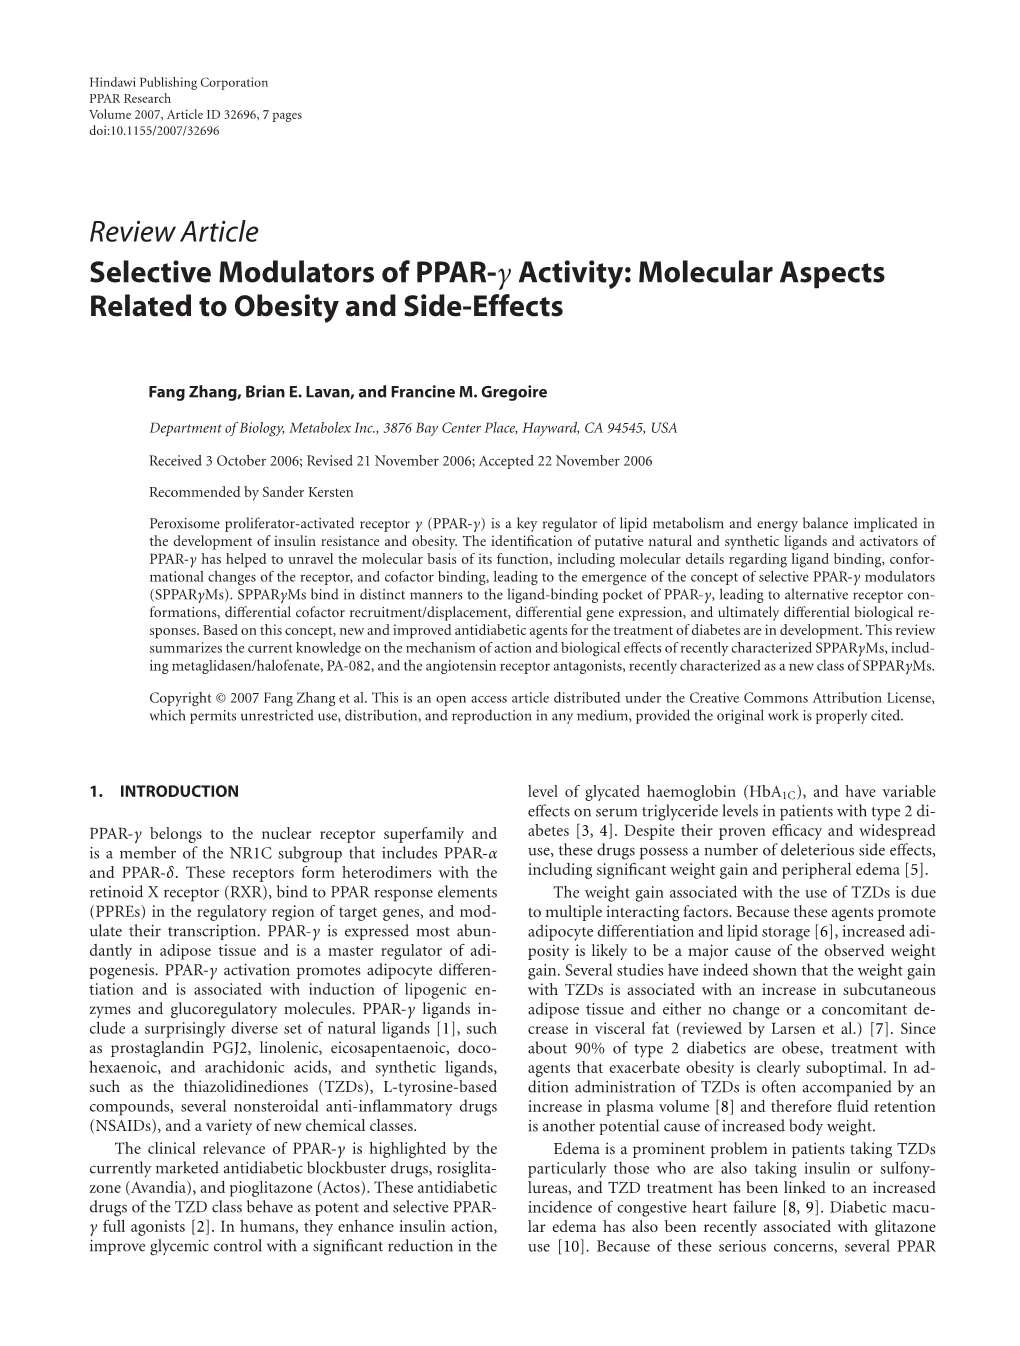 Selective Modulators of PPAR-Γ Activity: Molecular Aspects Related to Obesity and Side-Effects